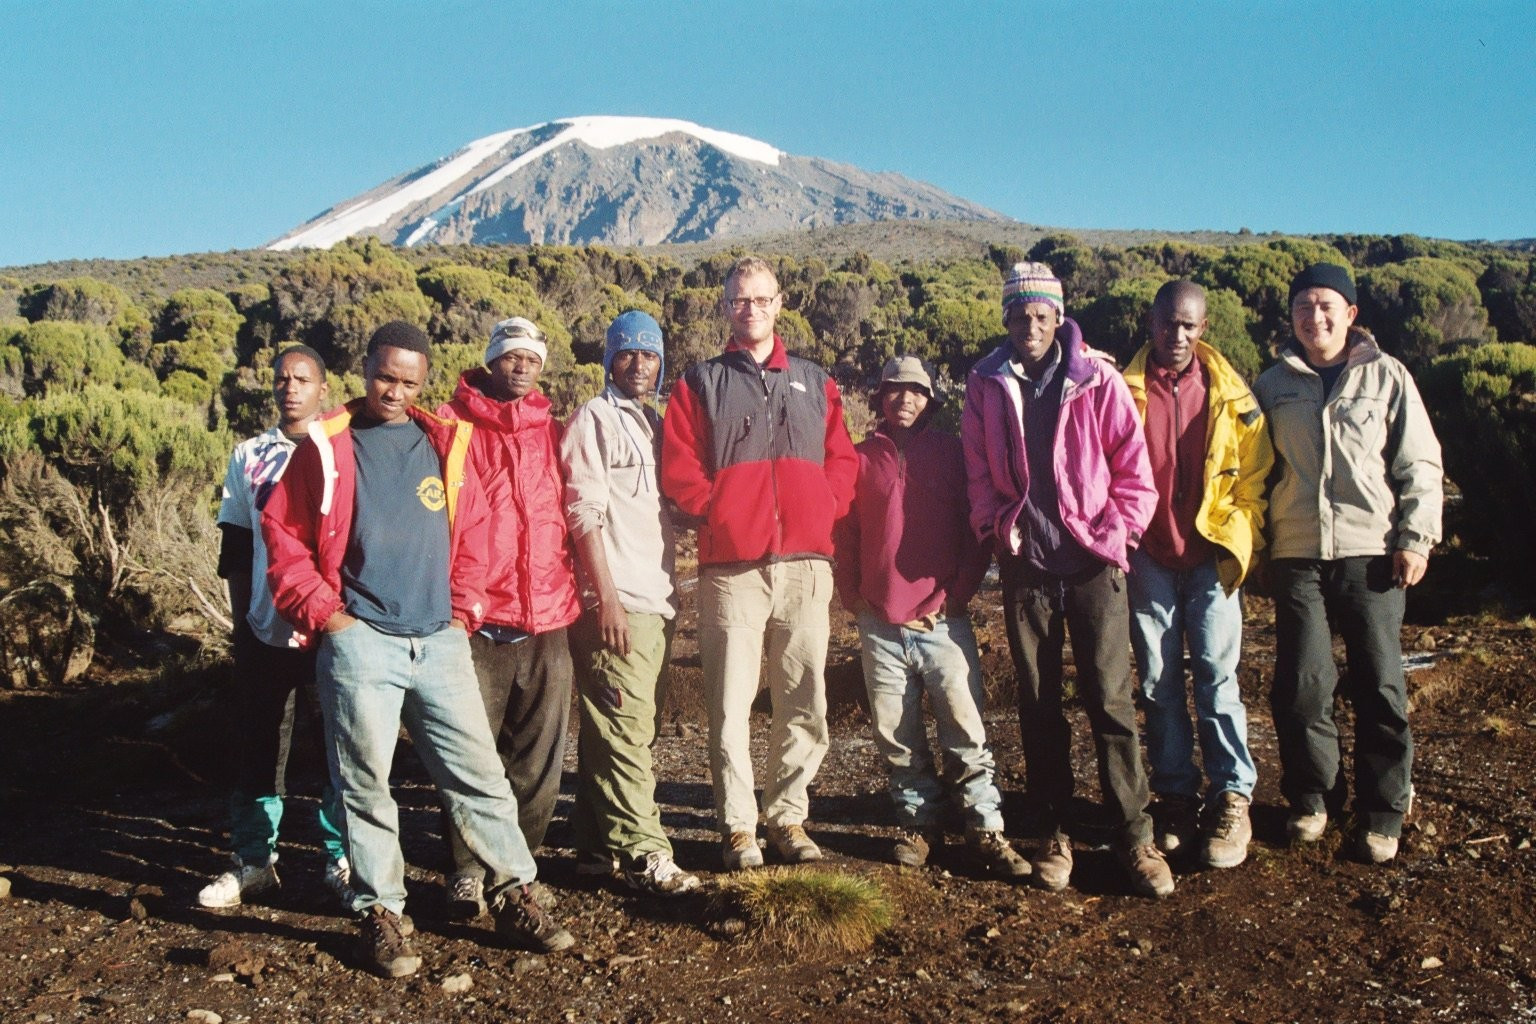 Group shot of Dirk, myself, and our Tanzanian guides and porters at 12000-foot Millenium Camp with views of the 19340-foot glacier-clad Kibo summit, on Mount Kilimanjaro, Tanzania